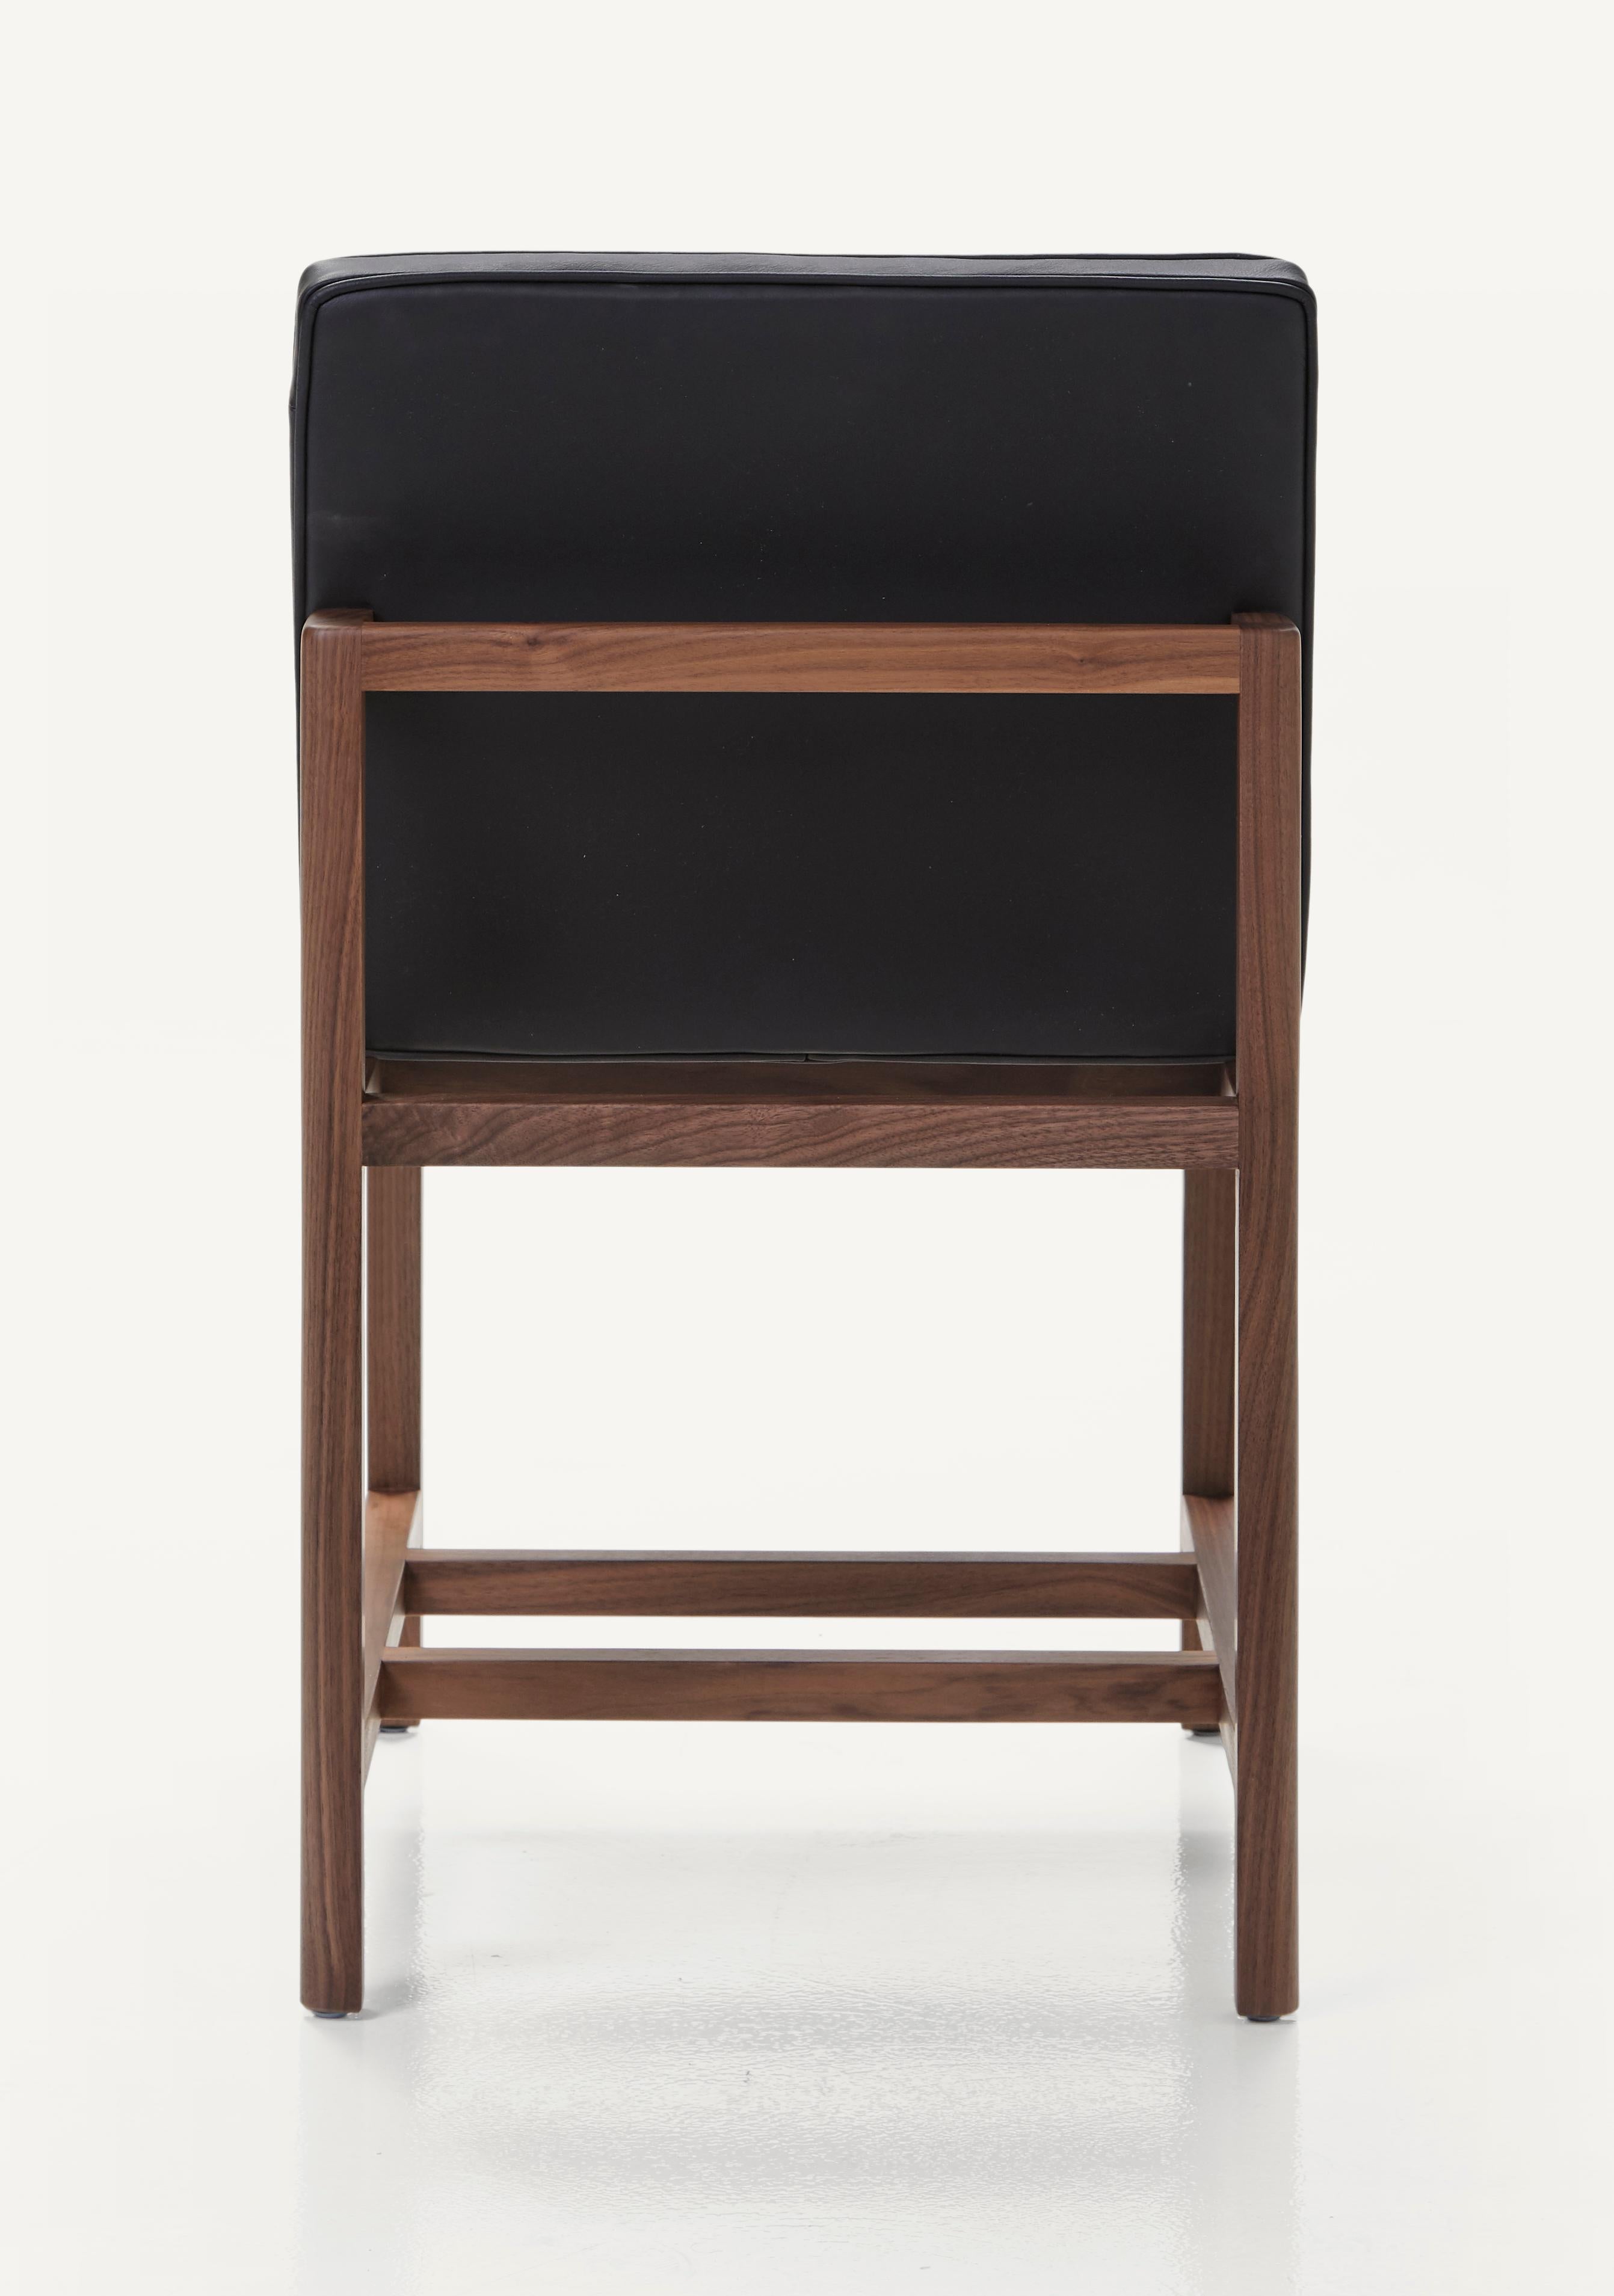 For Sale: Black (Comfort 99991 Black) Wood Frame Armless Chair Petit in Walnut and Leather Designed by Craig Bassam 4